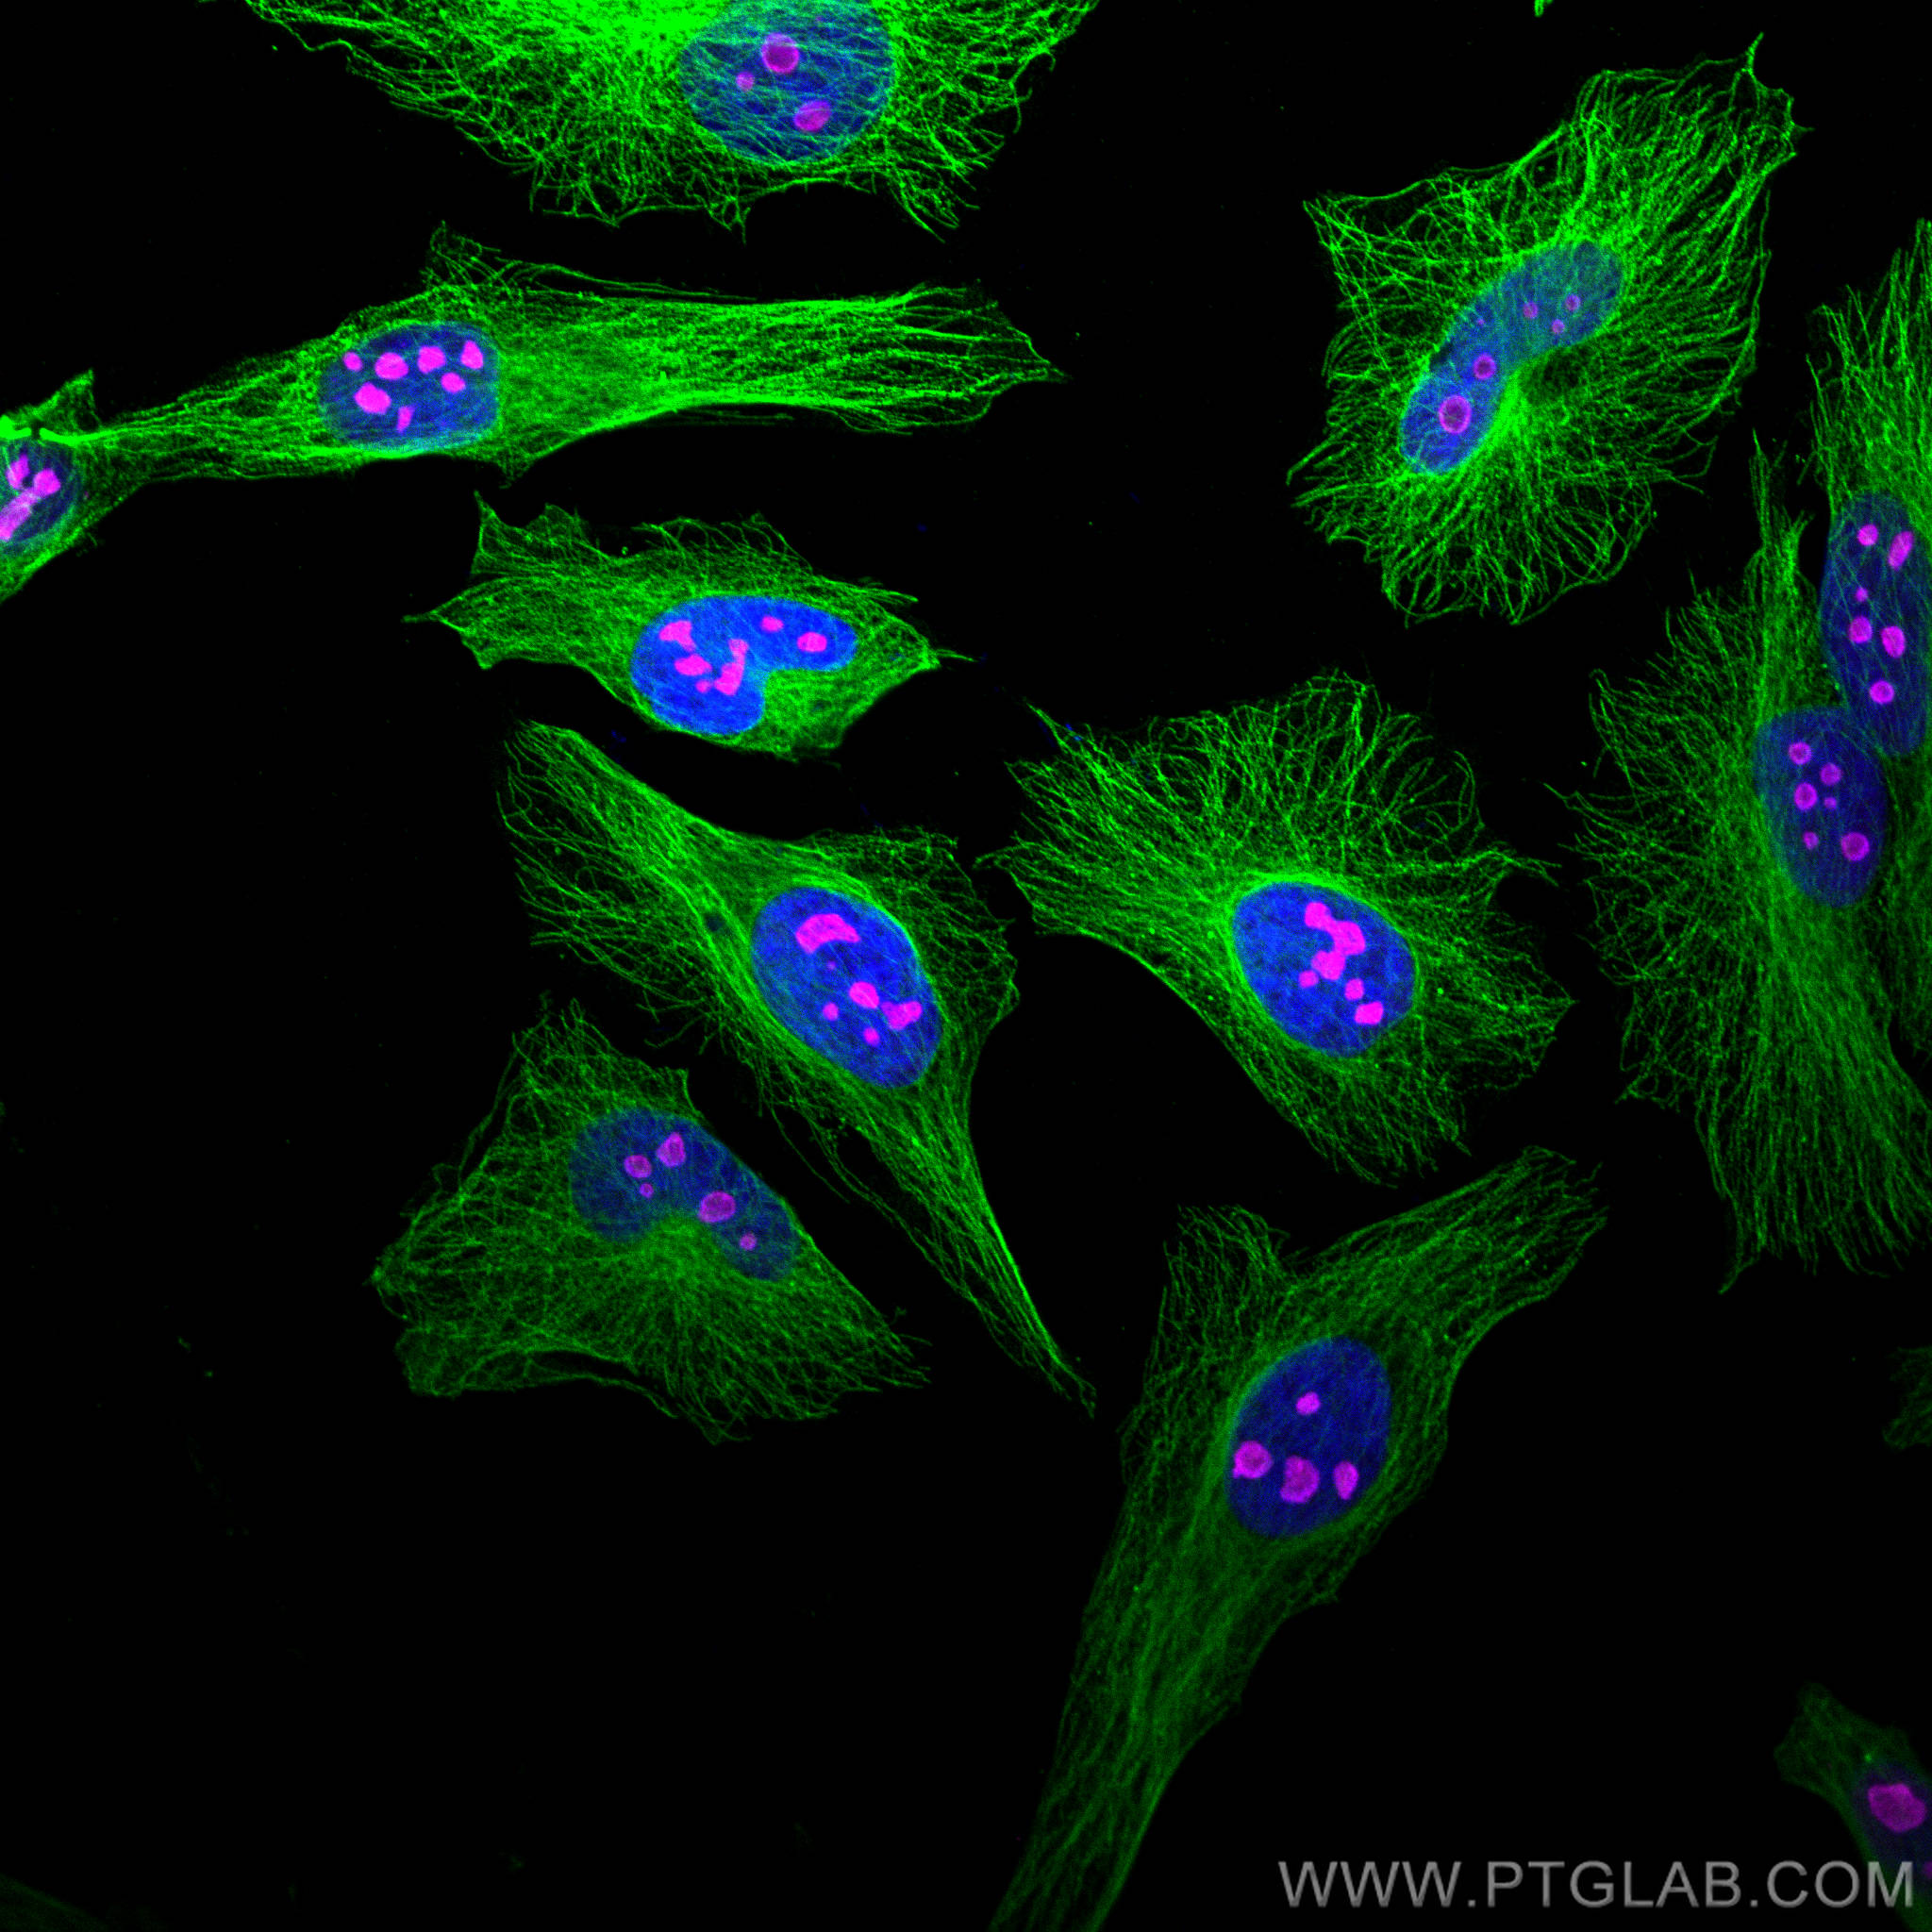 Immunofluorescence of Hela cells: Hela cells were fixed with 4% PFA and stained with Rabbit anti-Alpha Tubulin polyclonal antibody (11224-1-AP, 1:200, green) and mouse anti-NPM1 monoclonal antibody (60096-1-Ig, 1:1000, magenta). Multi-rAb CoraLite® Plus 488-Goat Anti-Rabbit Recombinant Secondary Antibody (H+L) (RGAR002, 1:500) and Multi-rAb CoraLite® Plus 647-Goat Anti-Mouse Recombinant Secondary Antibody (H+L) (RGAM005, 1:500) were used for detection. 